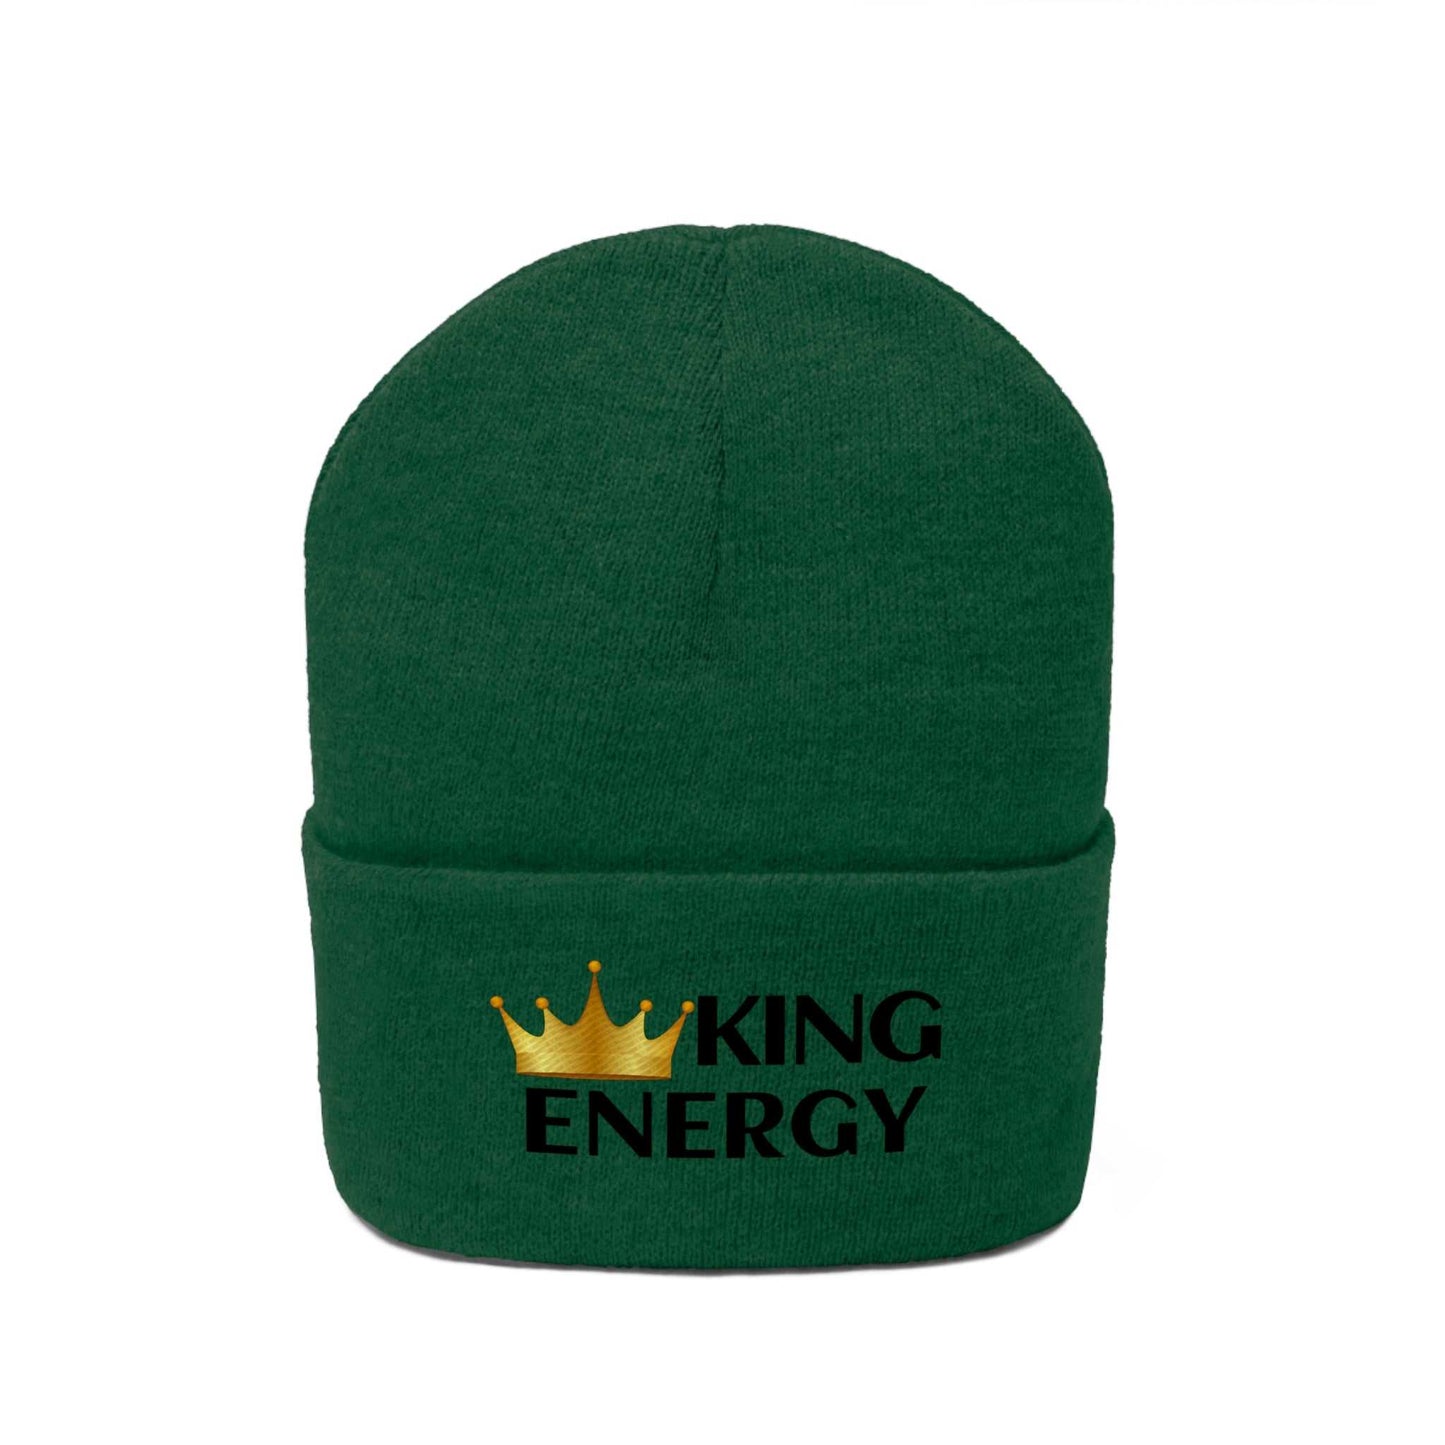 King Energy Knit Beanie Motivation on the Go!! Hats Good Vibes Daily Lab 18